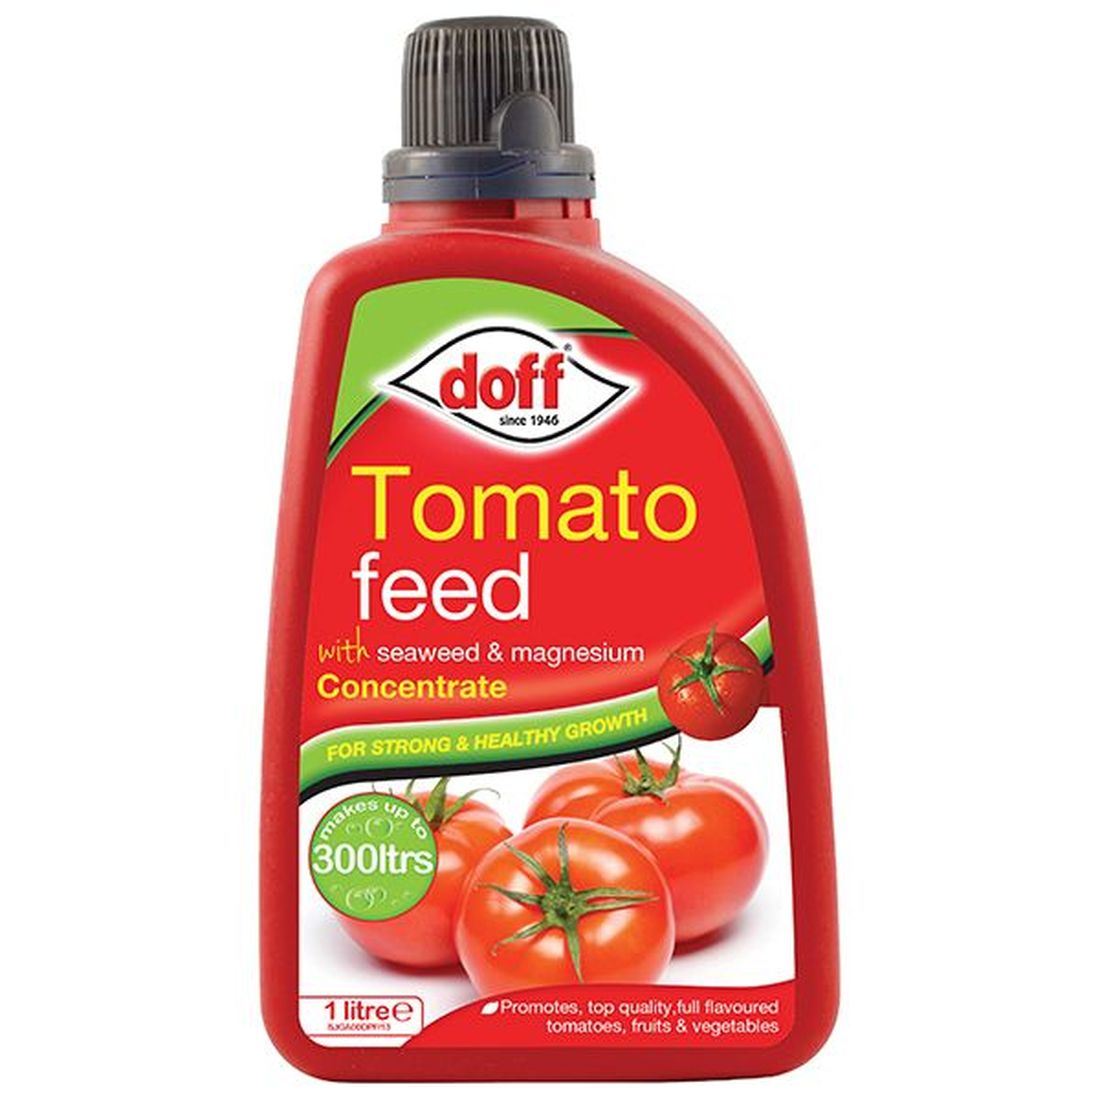 DOFF Tomato Feed Concentrate 1 litre   